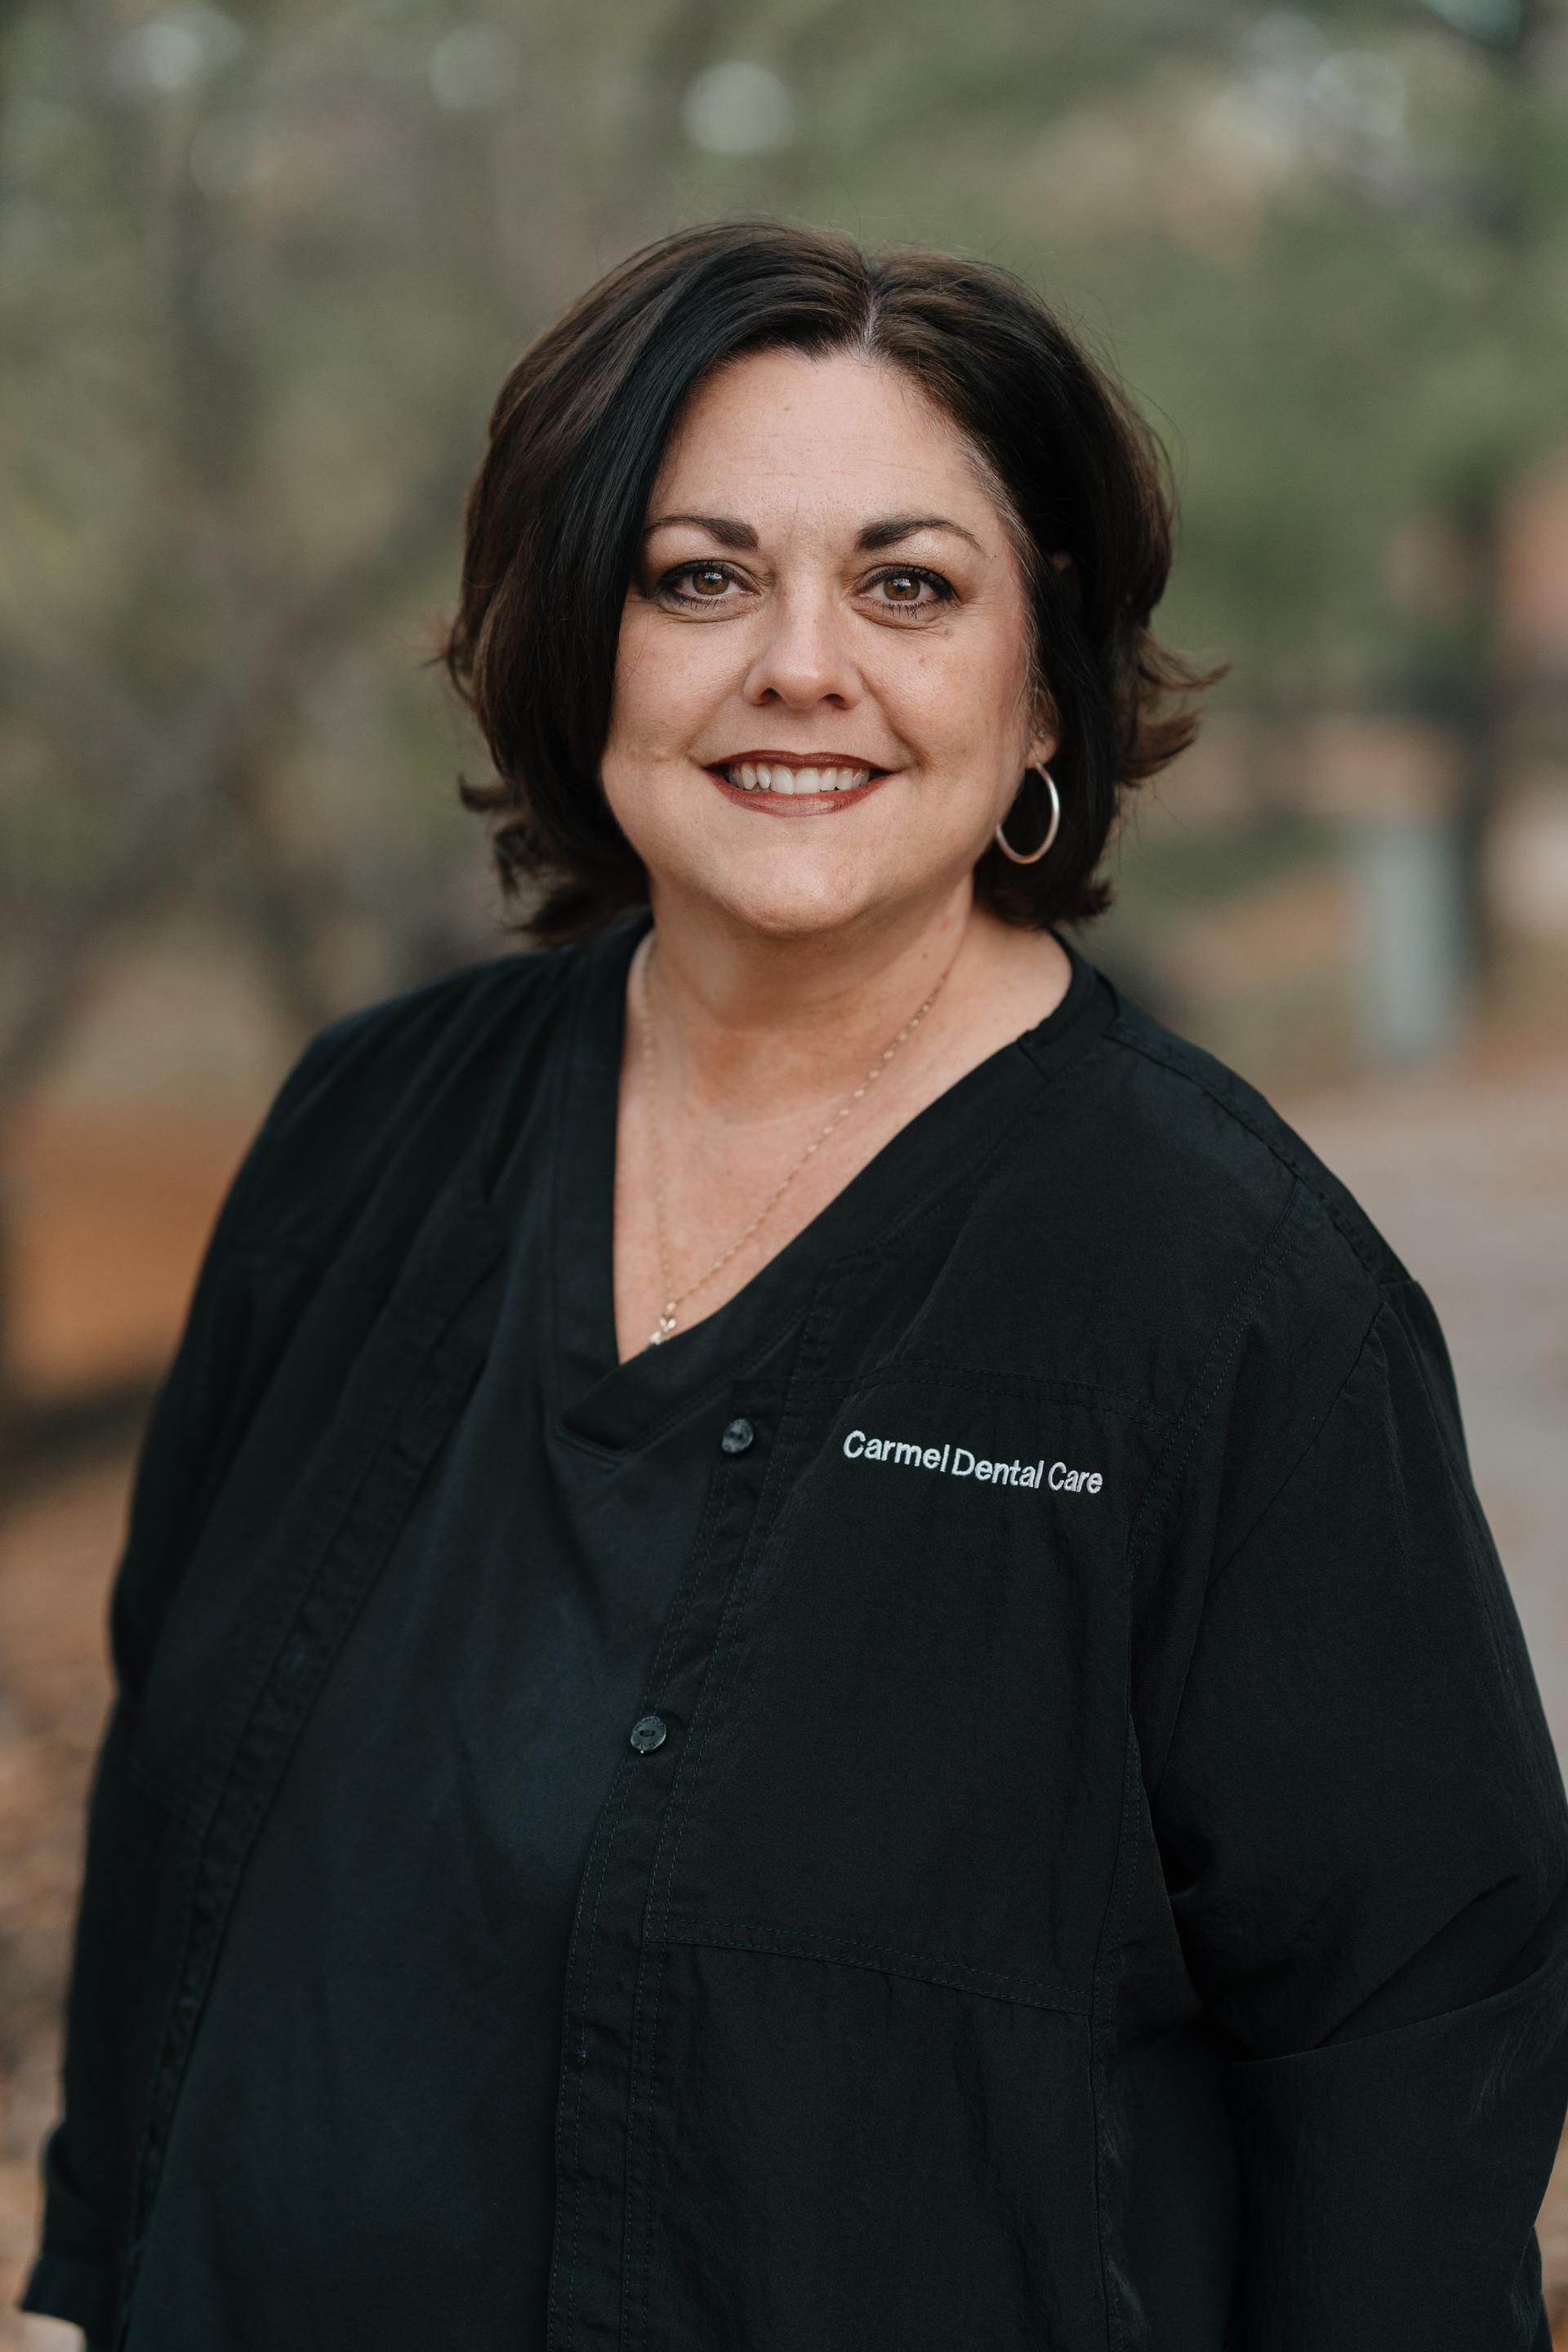 Professional and friendly staff member at Carmel Dental Care, ready to assist patients with their dental needs and provide exceptional care.